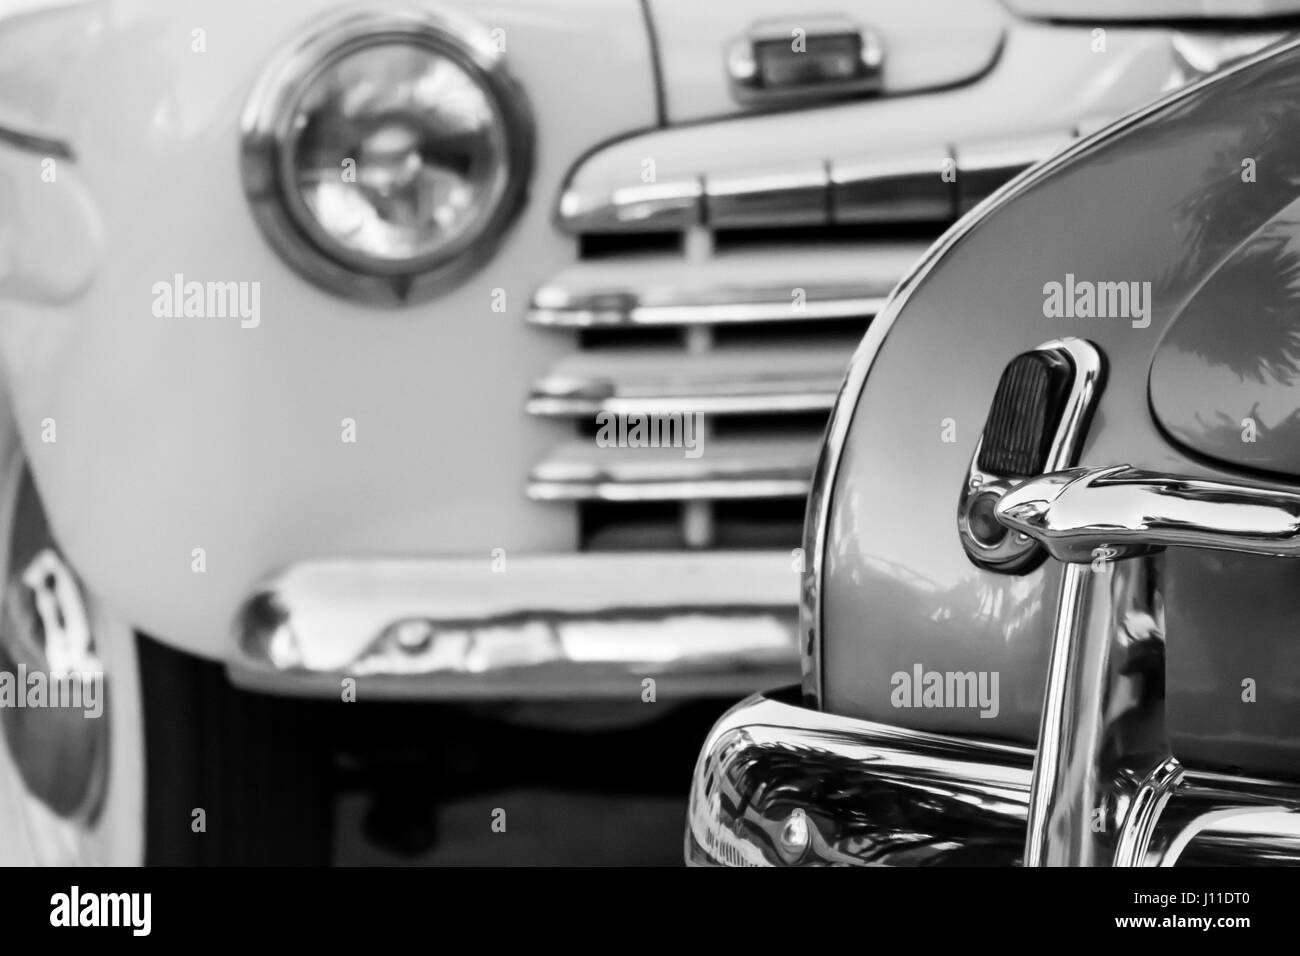 Close Up View of Vintage Cars Stock Photo